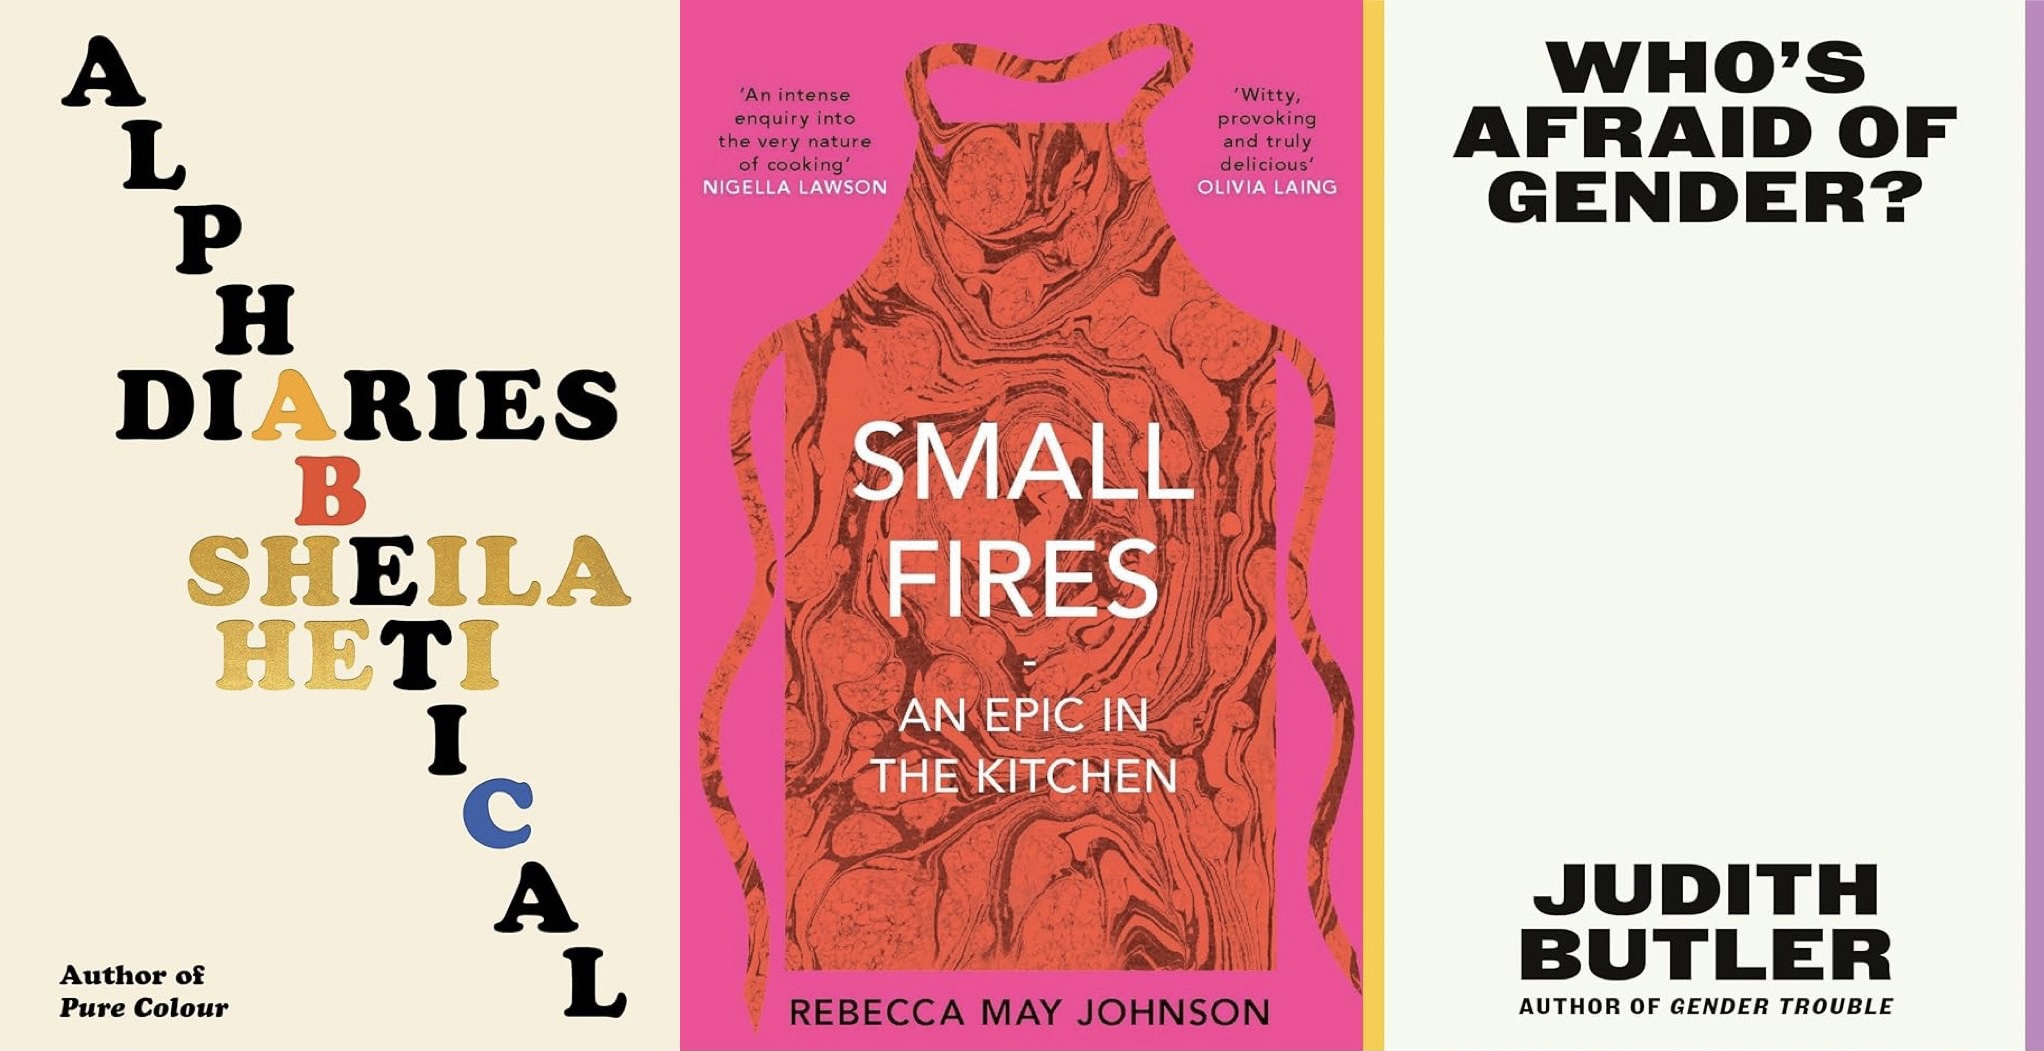 3 books to read this month: Who’s Afraid of Gender, Small Fires, Alphabetical Diaries